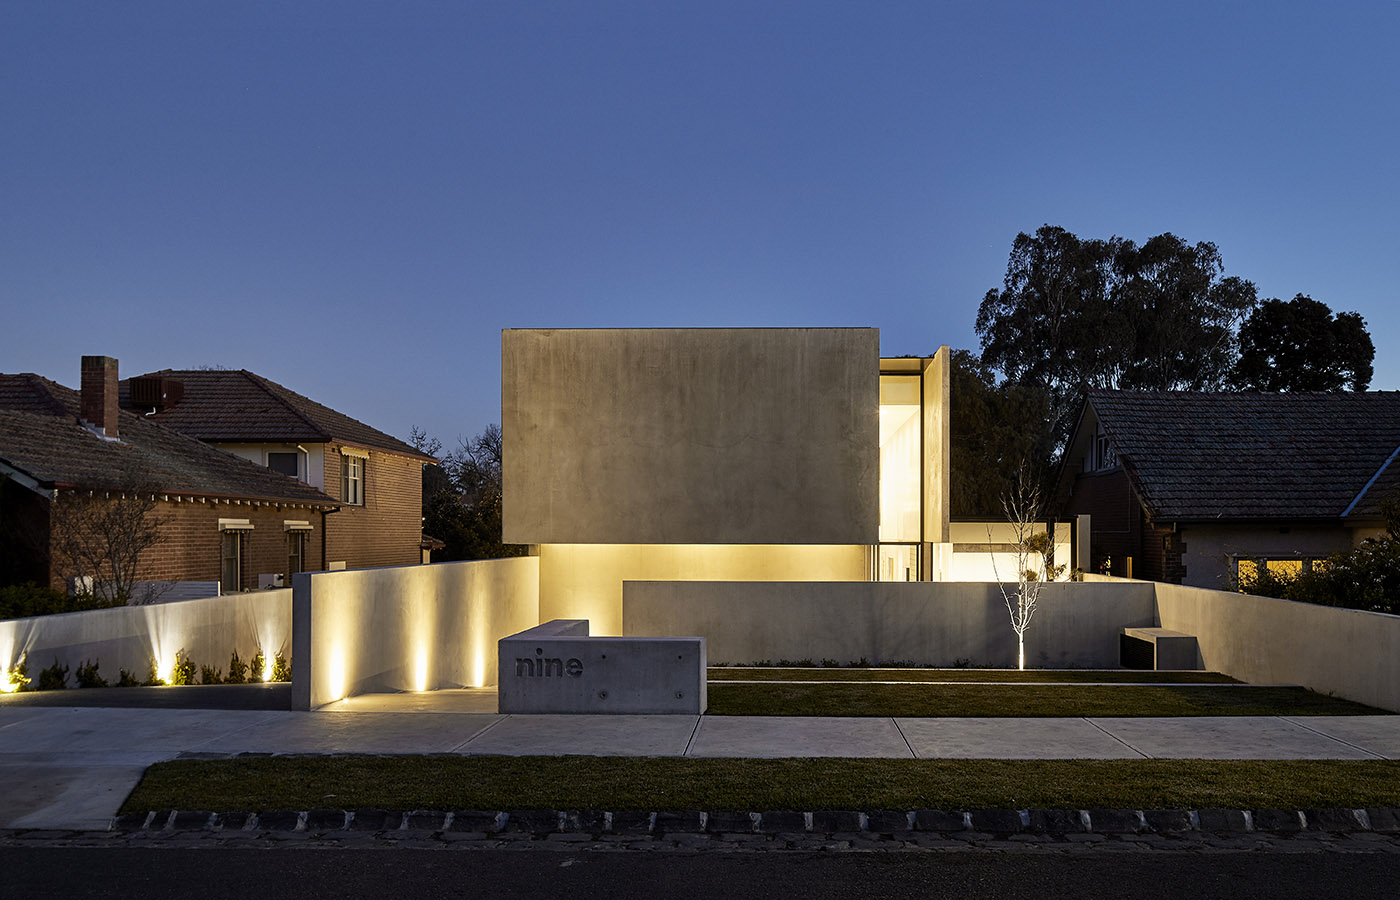 Salmon Avenue, an architecture designed as a manifesto to represent the beauty of raw concrete